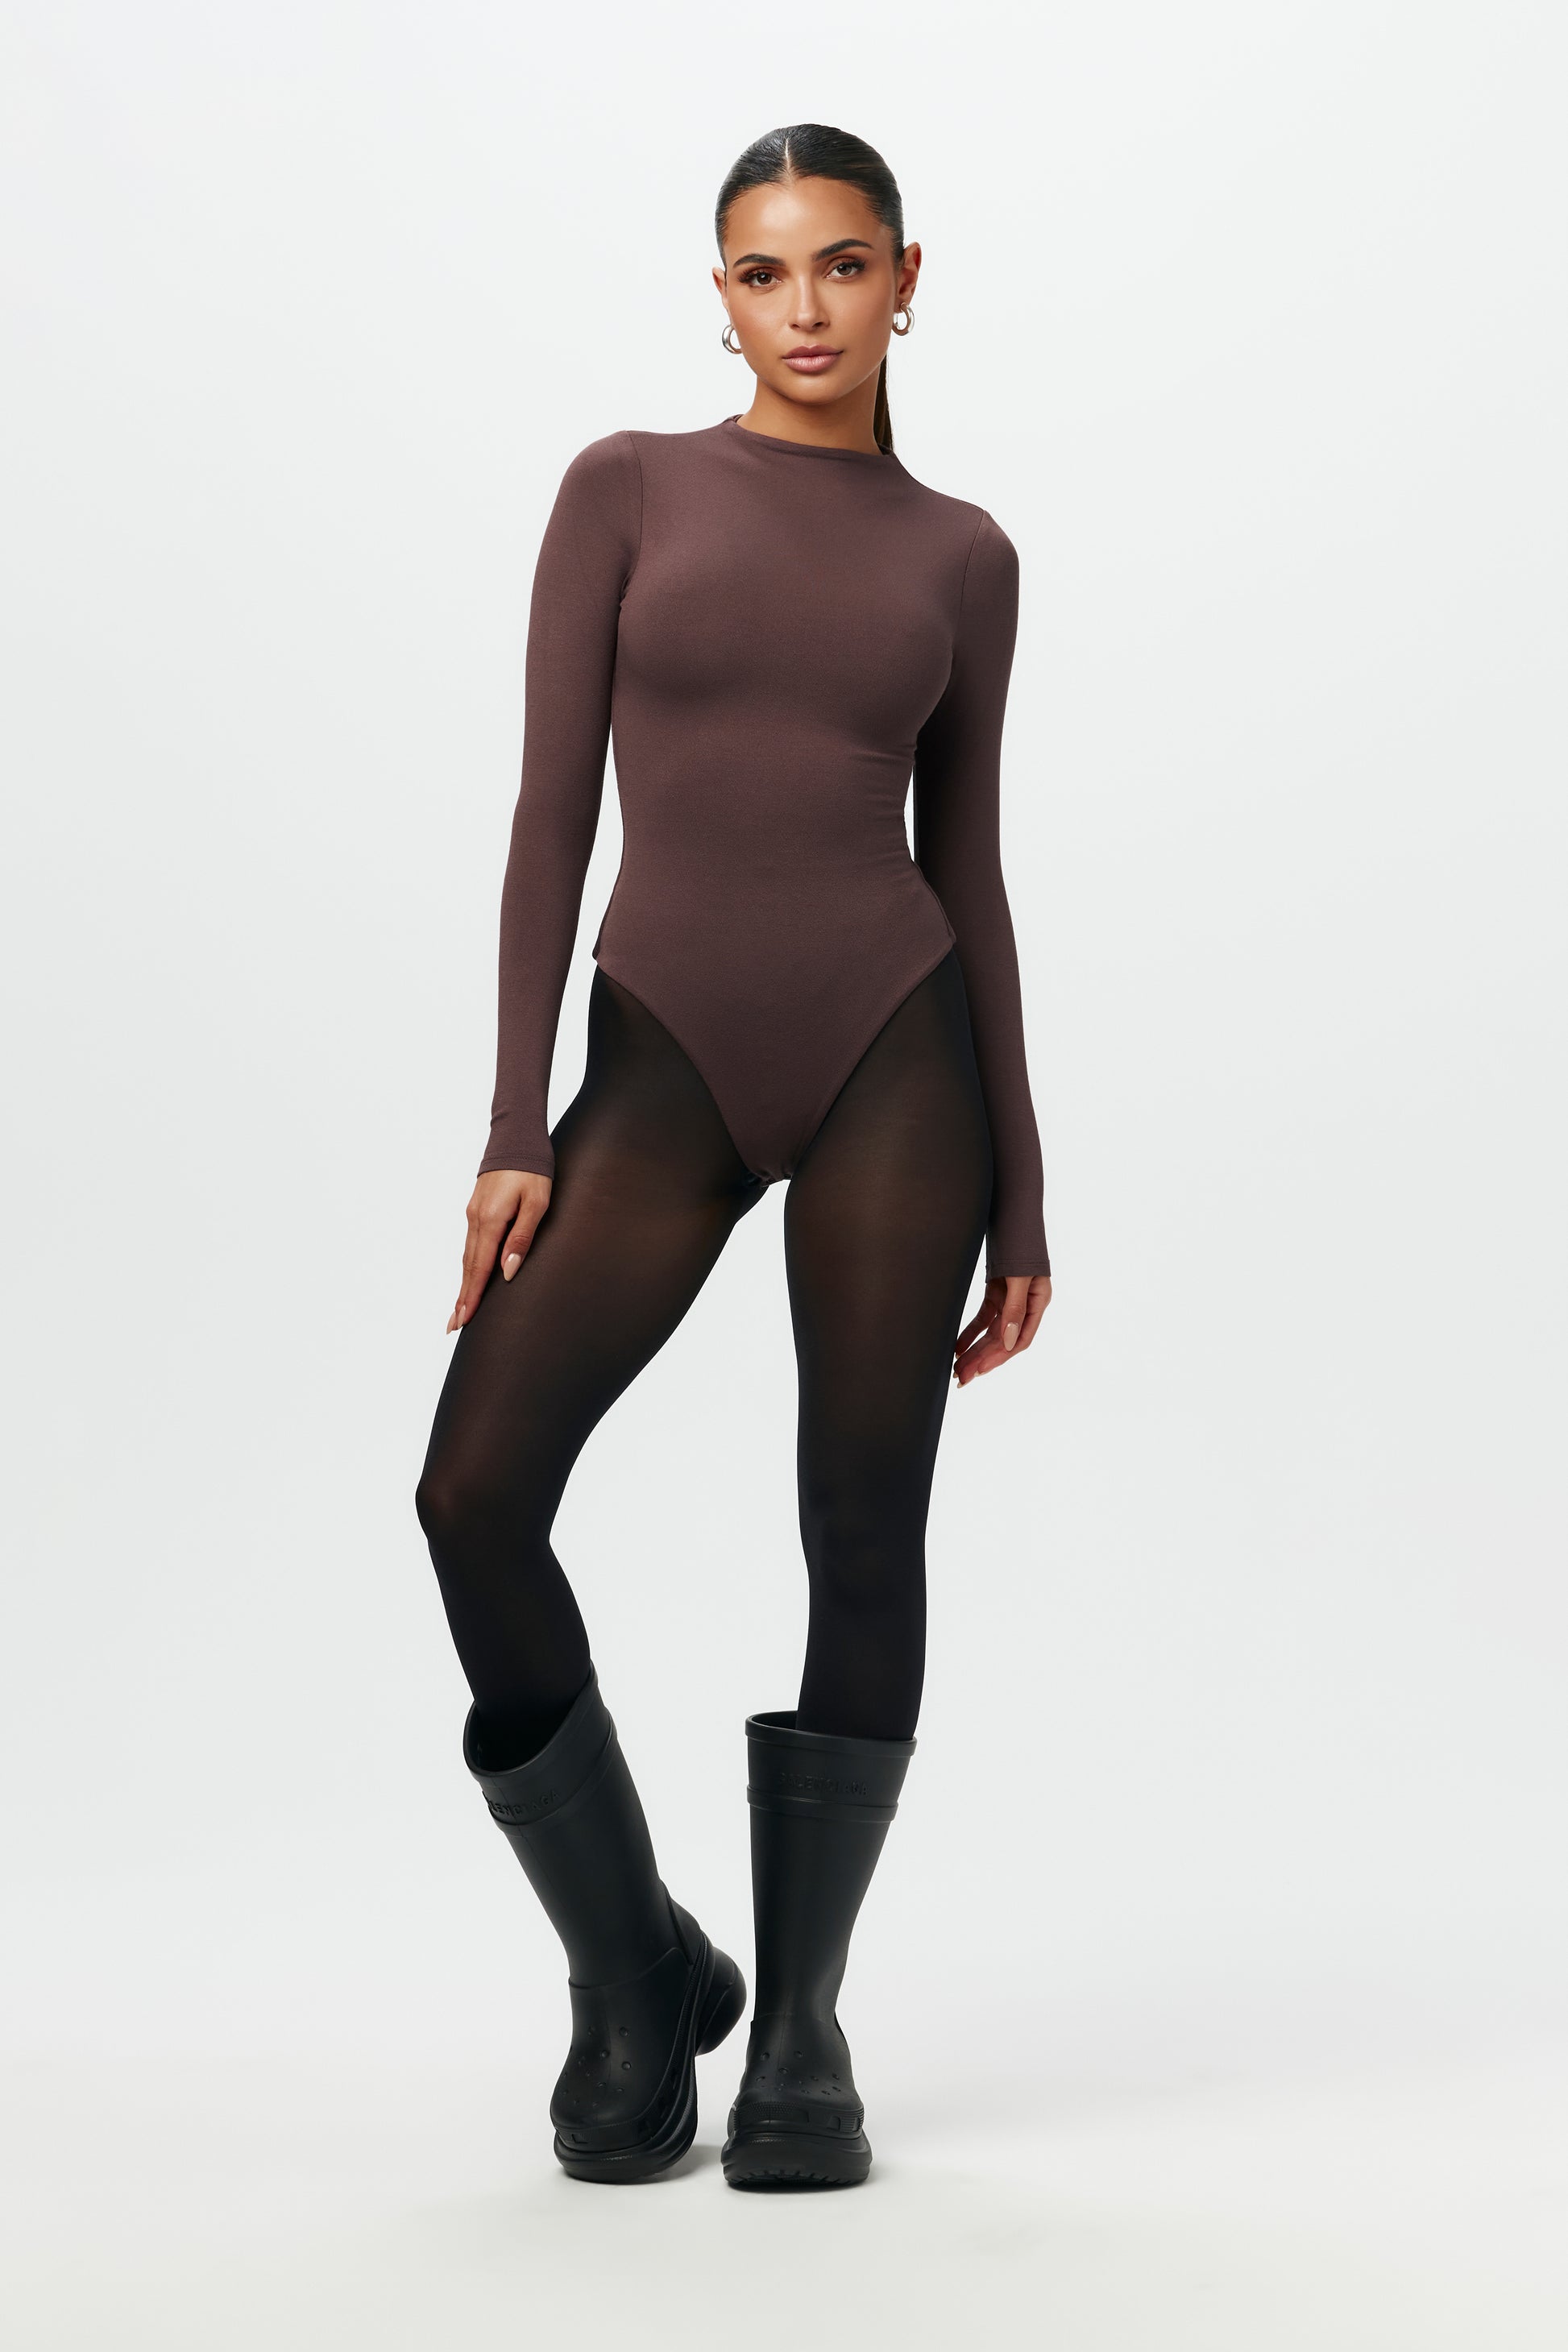 Naked Wardrobe Bodysuits for Women sale - discounted price